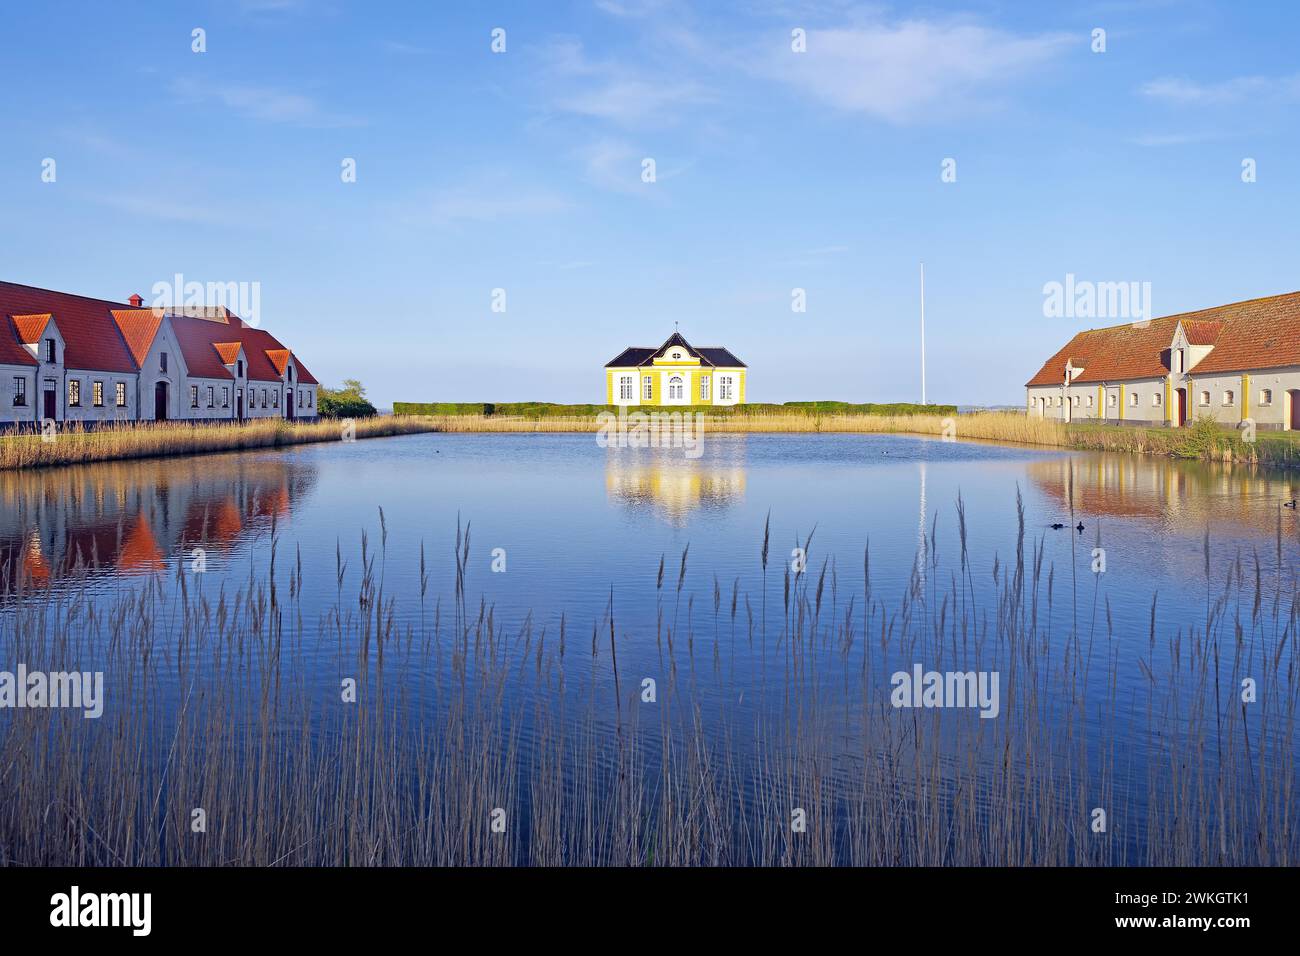 Large houses and the teahouse at Valdemars Slot are reflected in the calm water, Valdemars Slot, Manor Route, Tasinge, Denmark Stock Photo